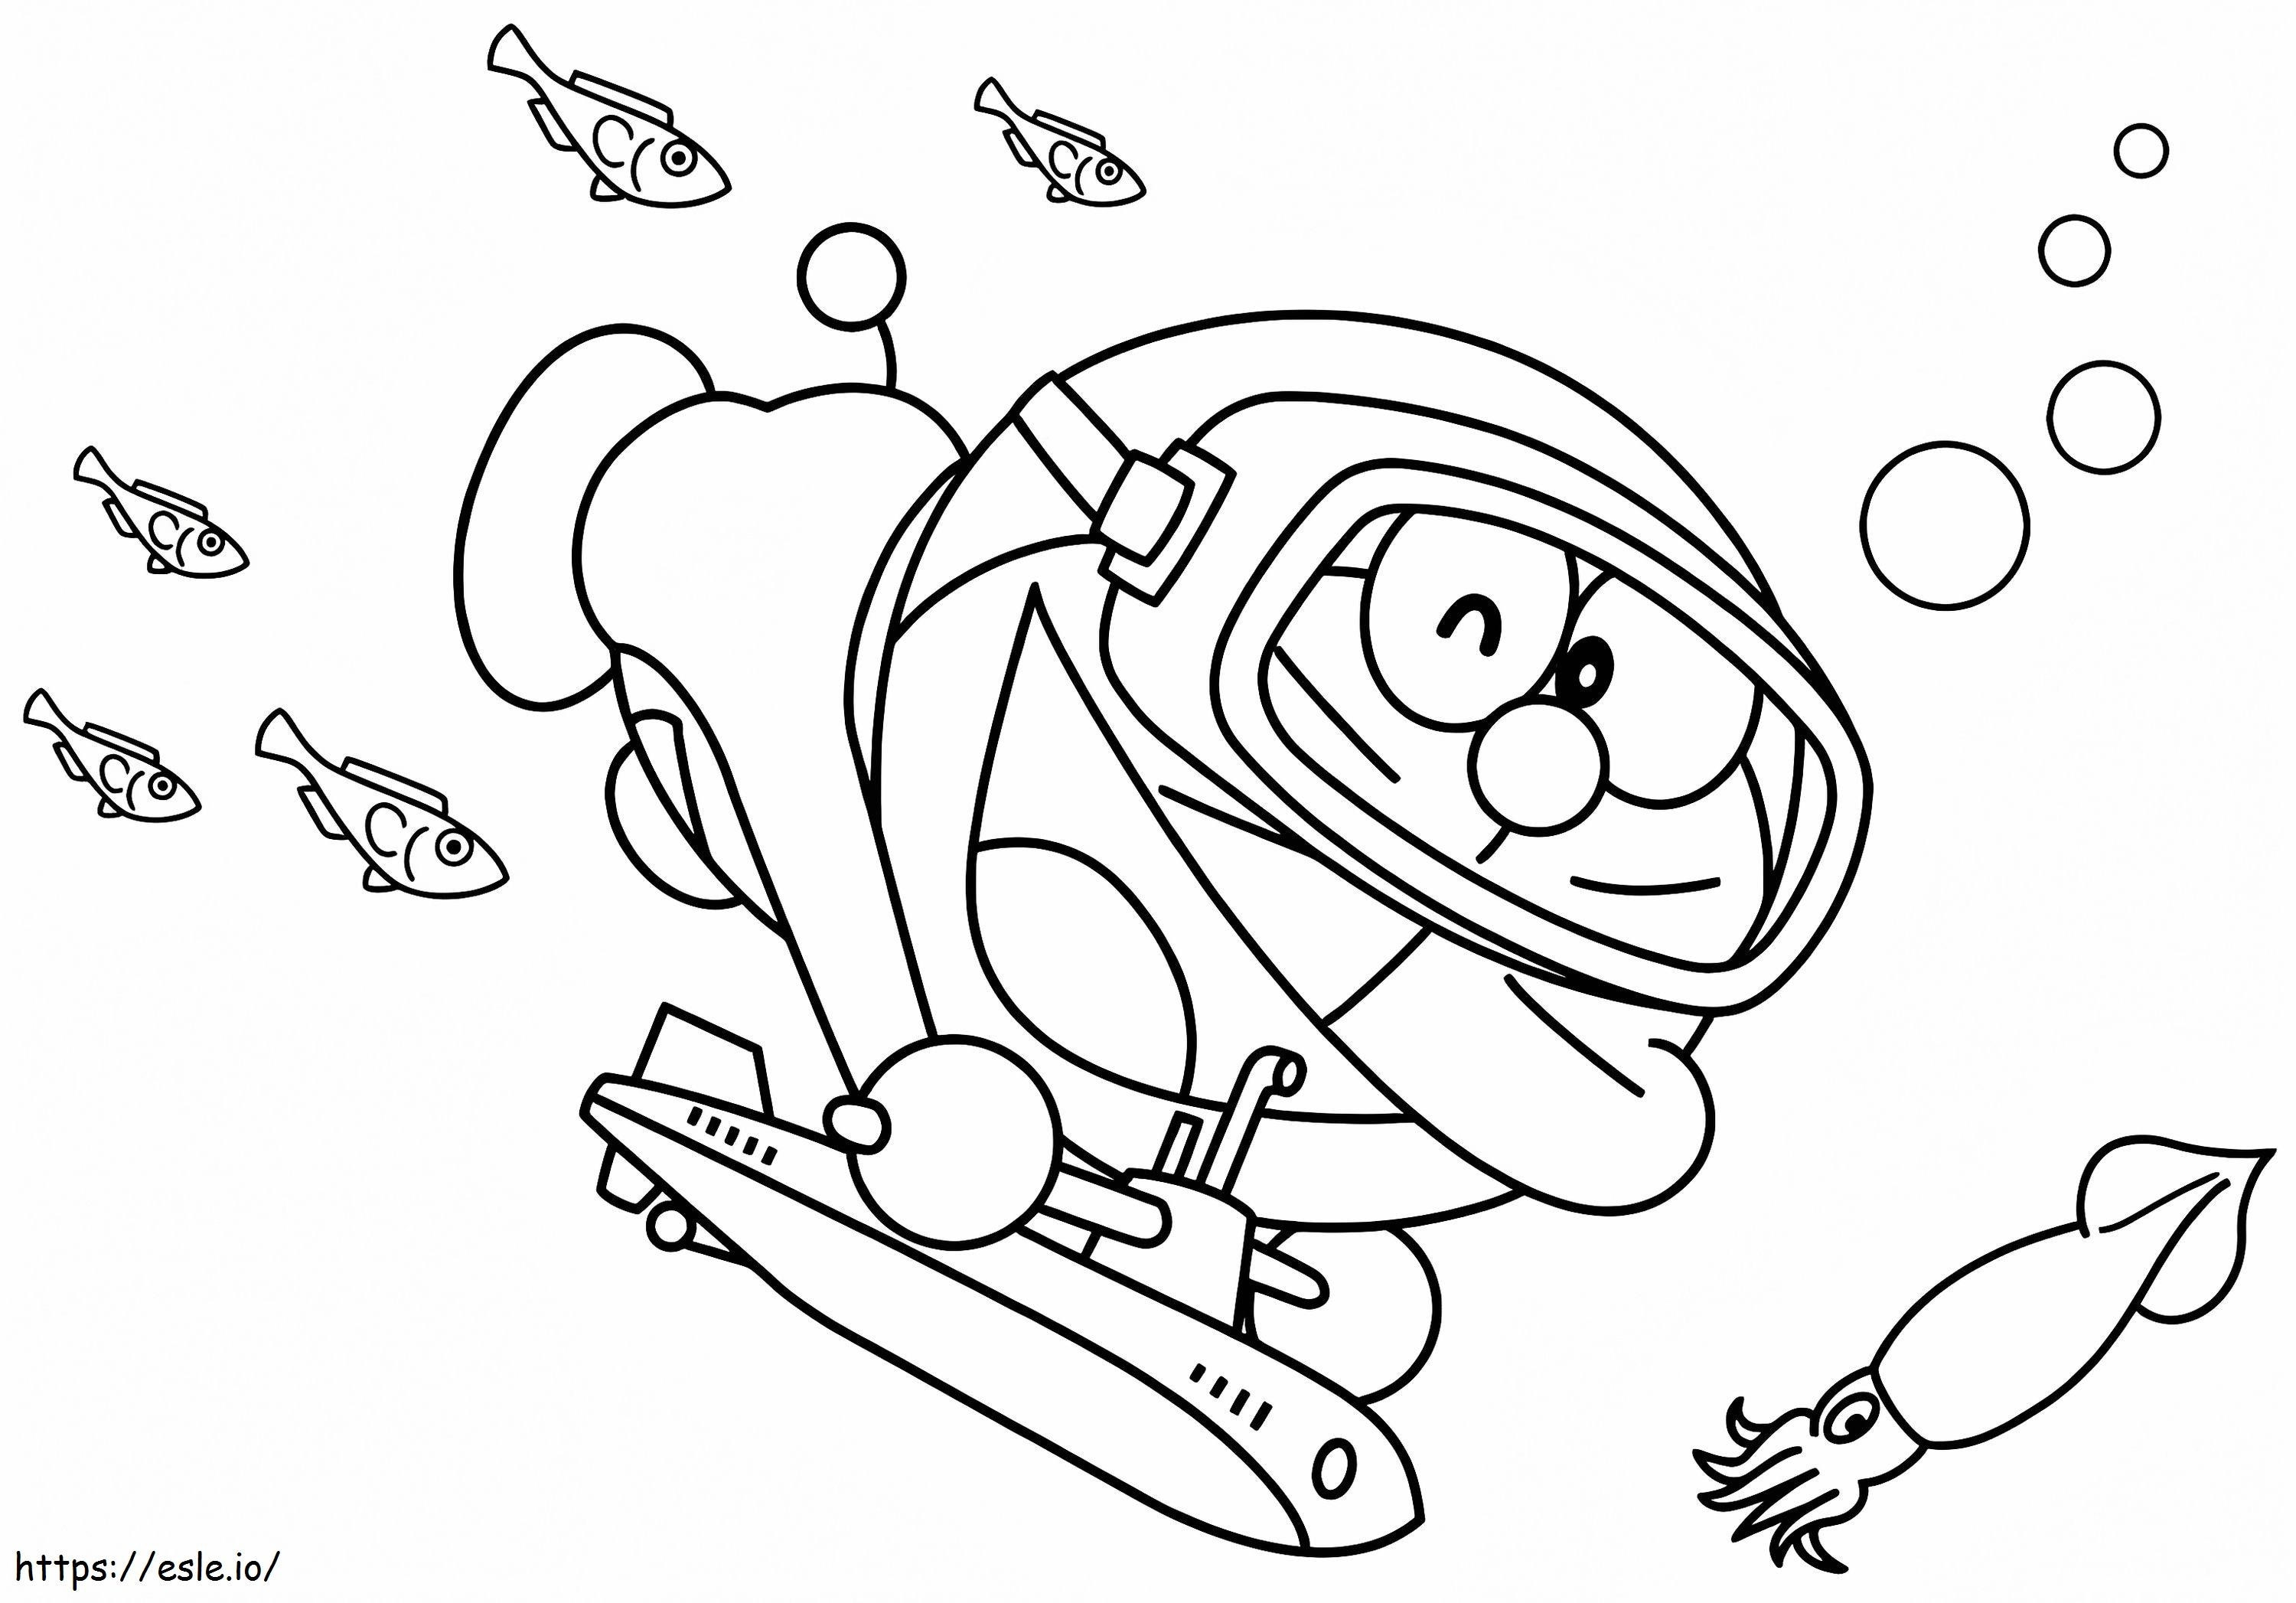 1540784456 Printable Cartoon Doraemon Colouring Pages For Kids Amp Boys 37737 765X534 1 coloring page